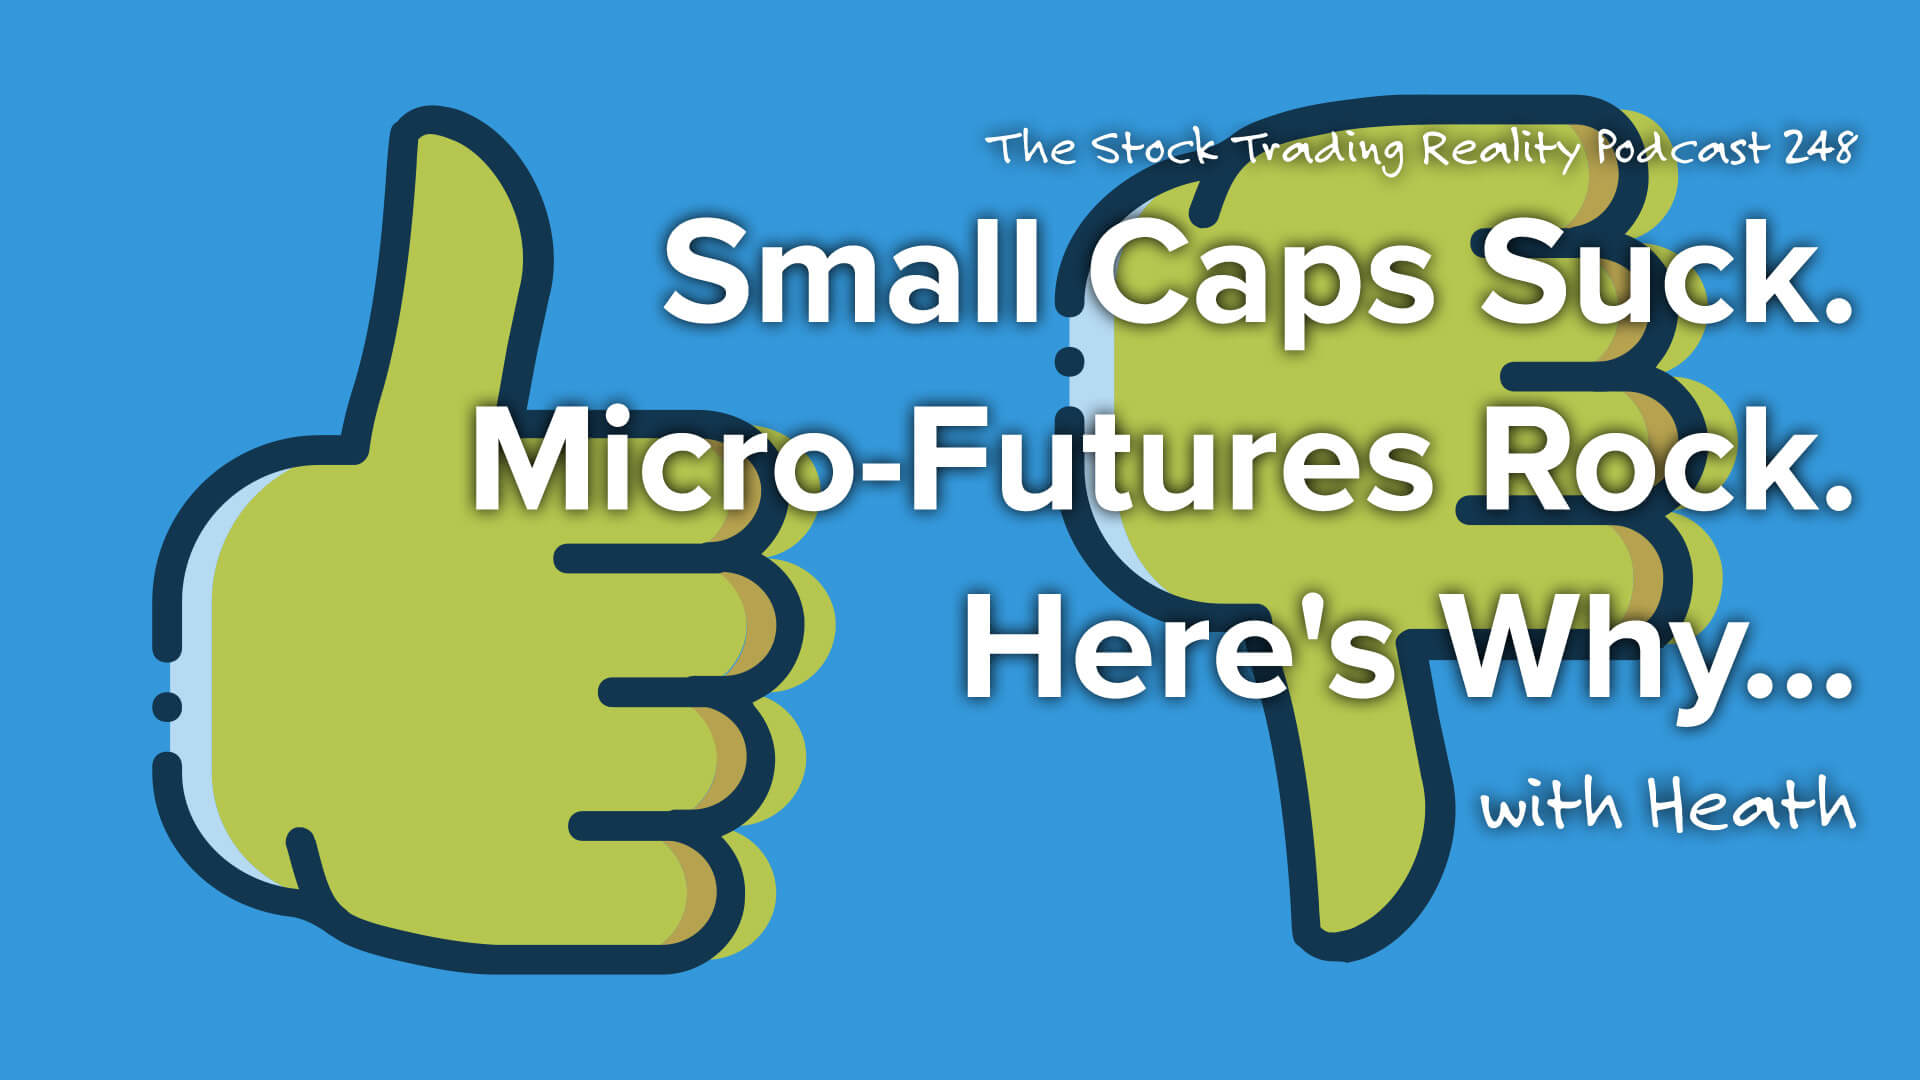 STR 248: Small Caps Suck. Micro-Futures Rock. Here's Why...